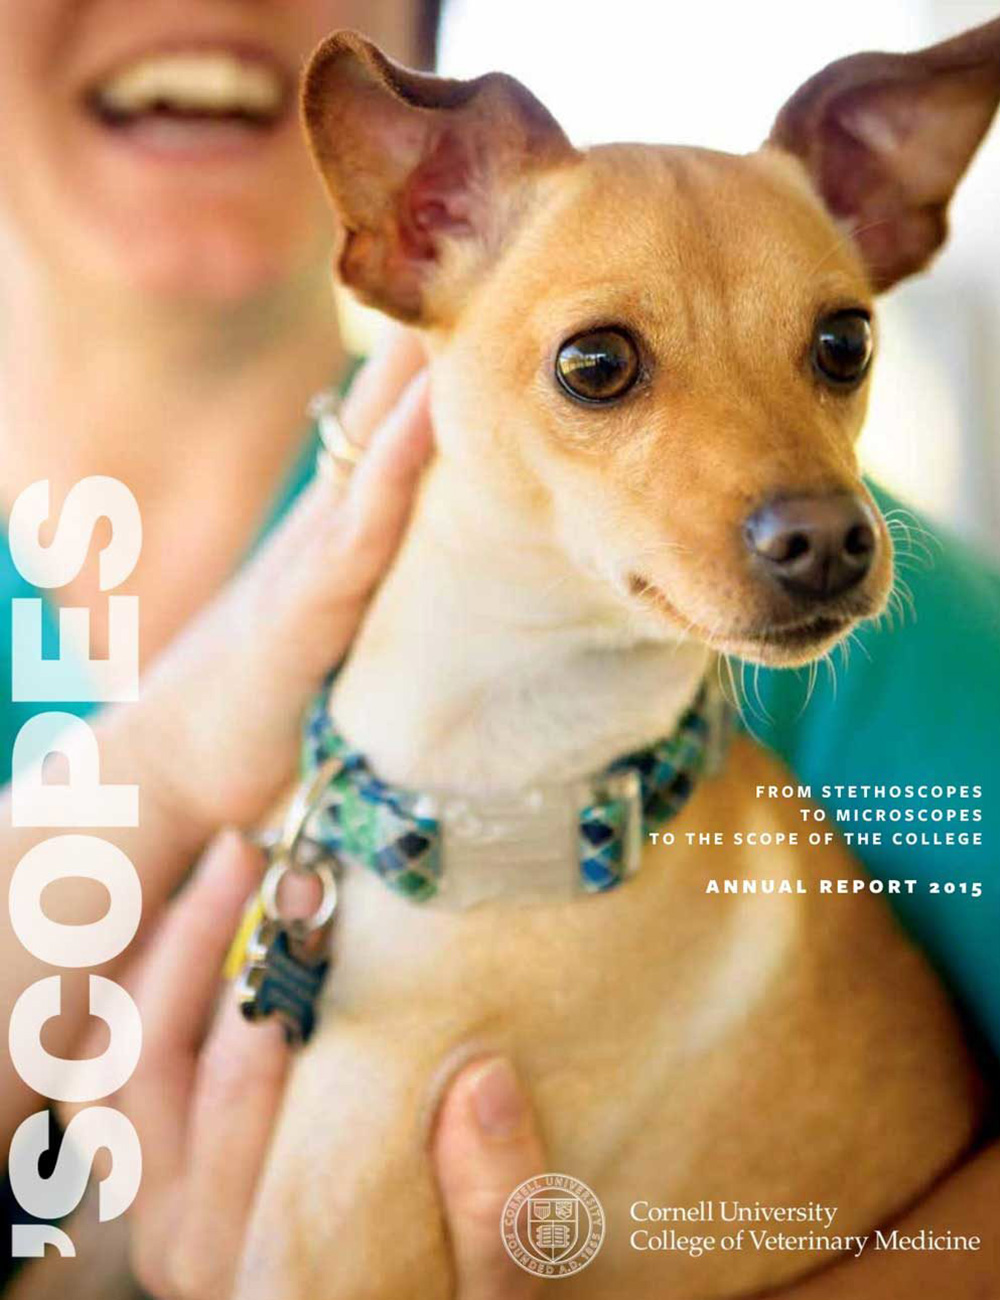 image of 'Scopes annual report 2015 cover featuring a small dog